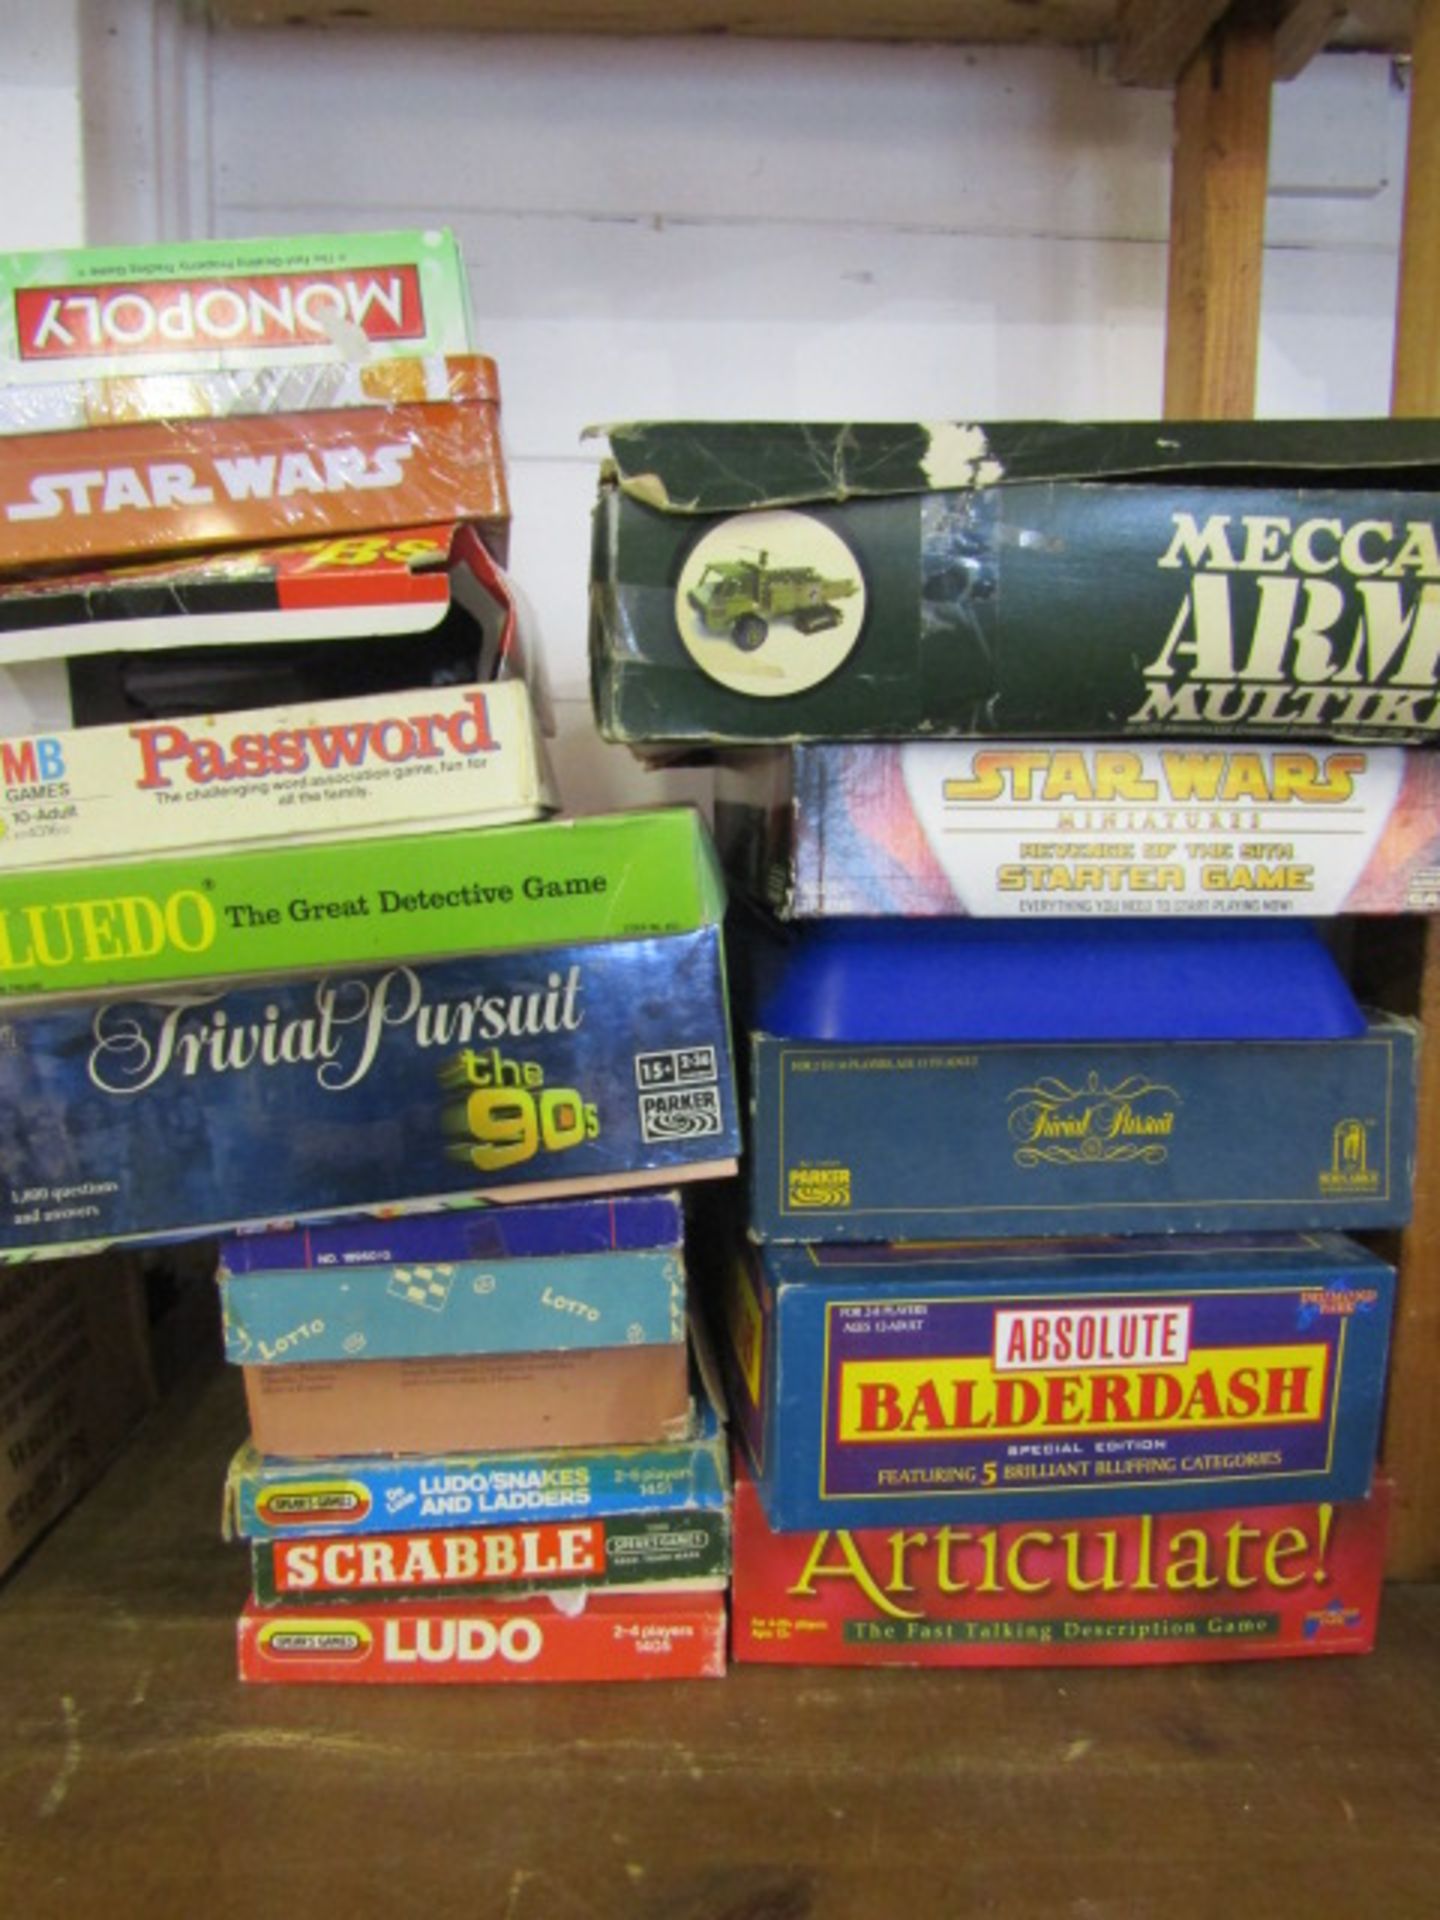 Military Meccano and various board games